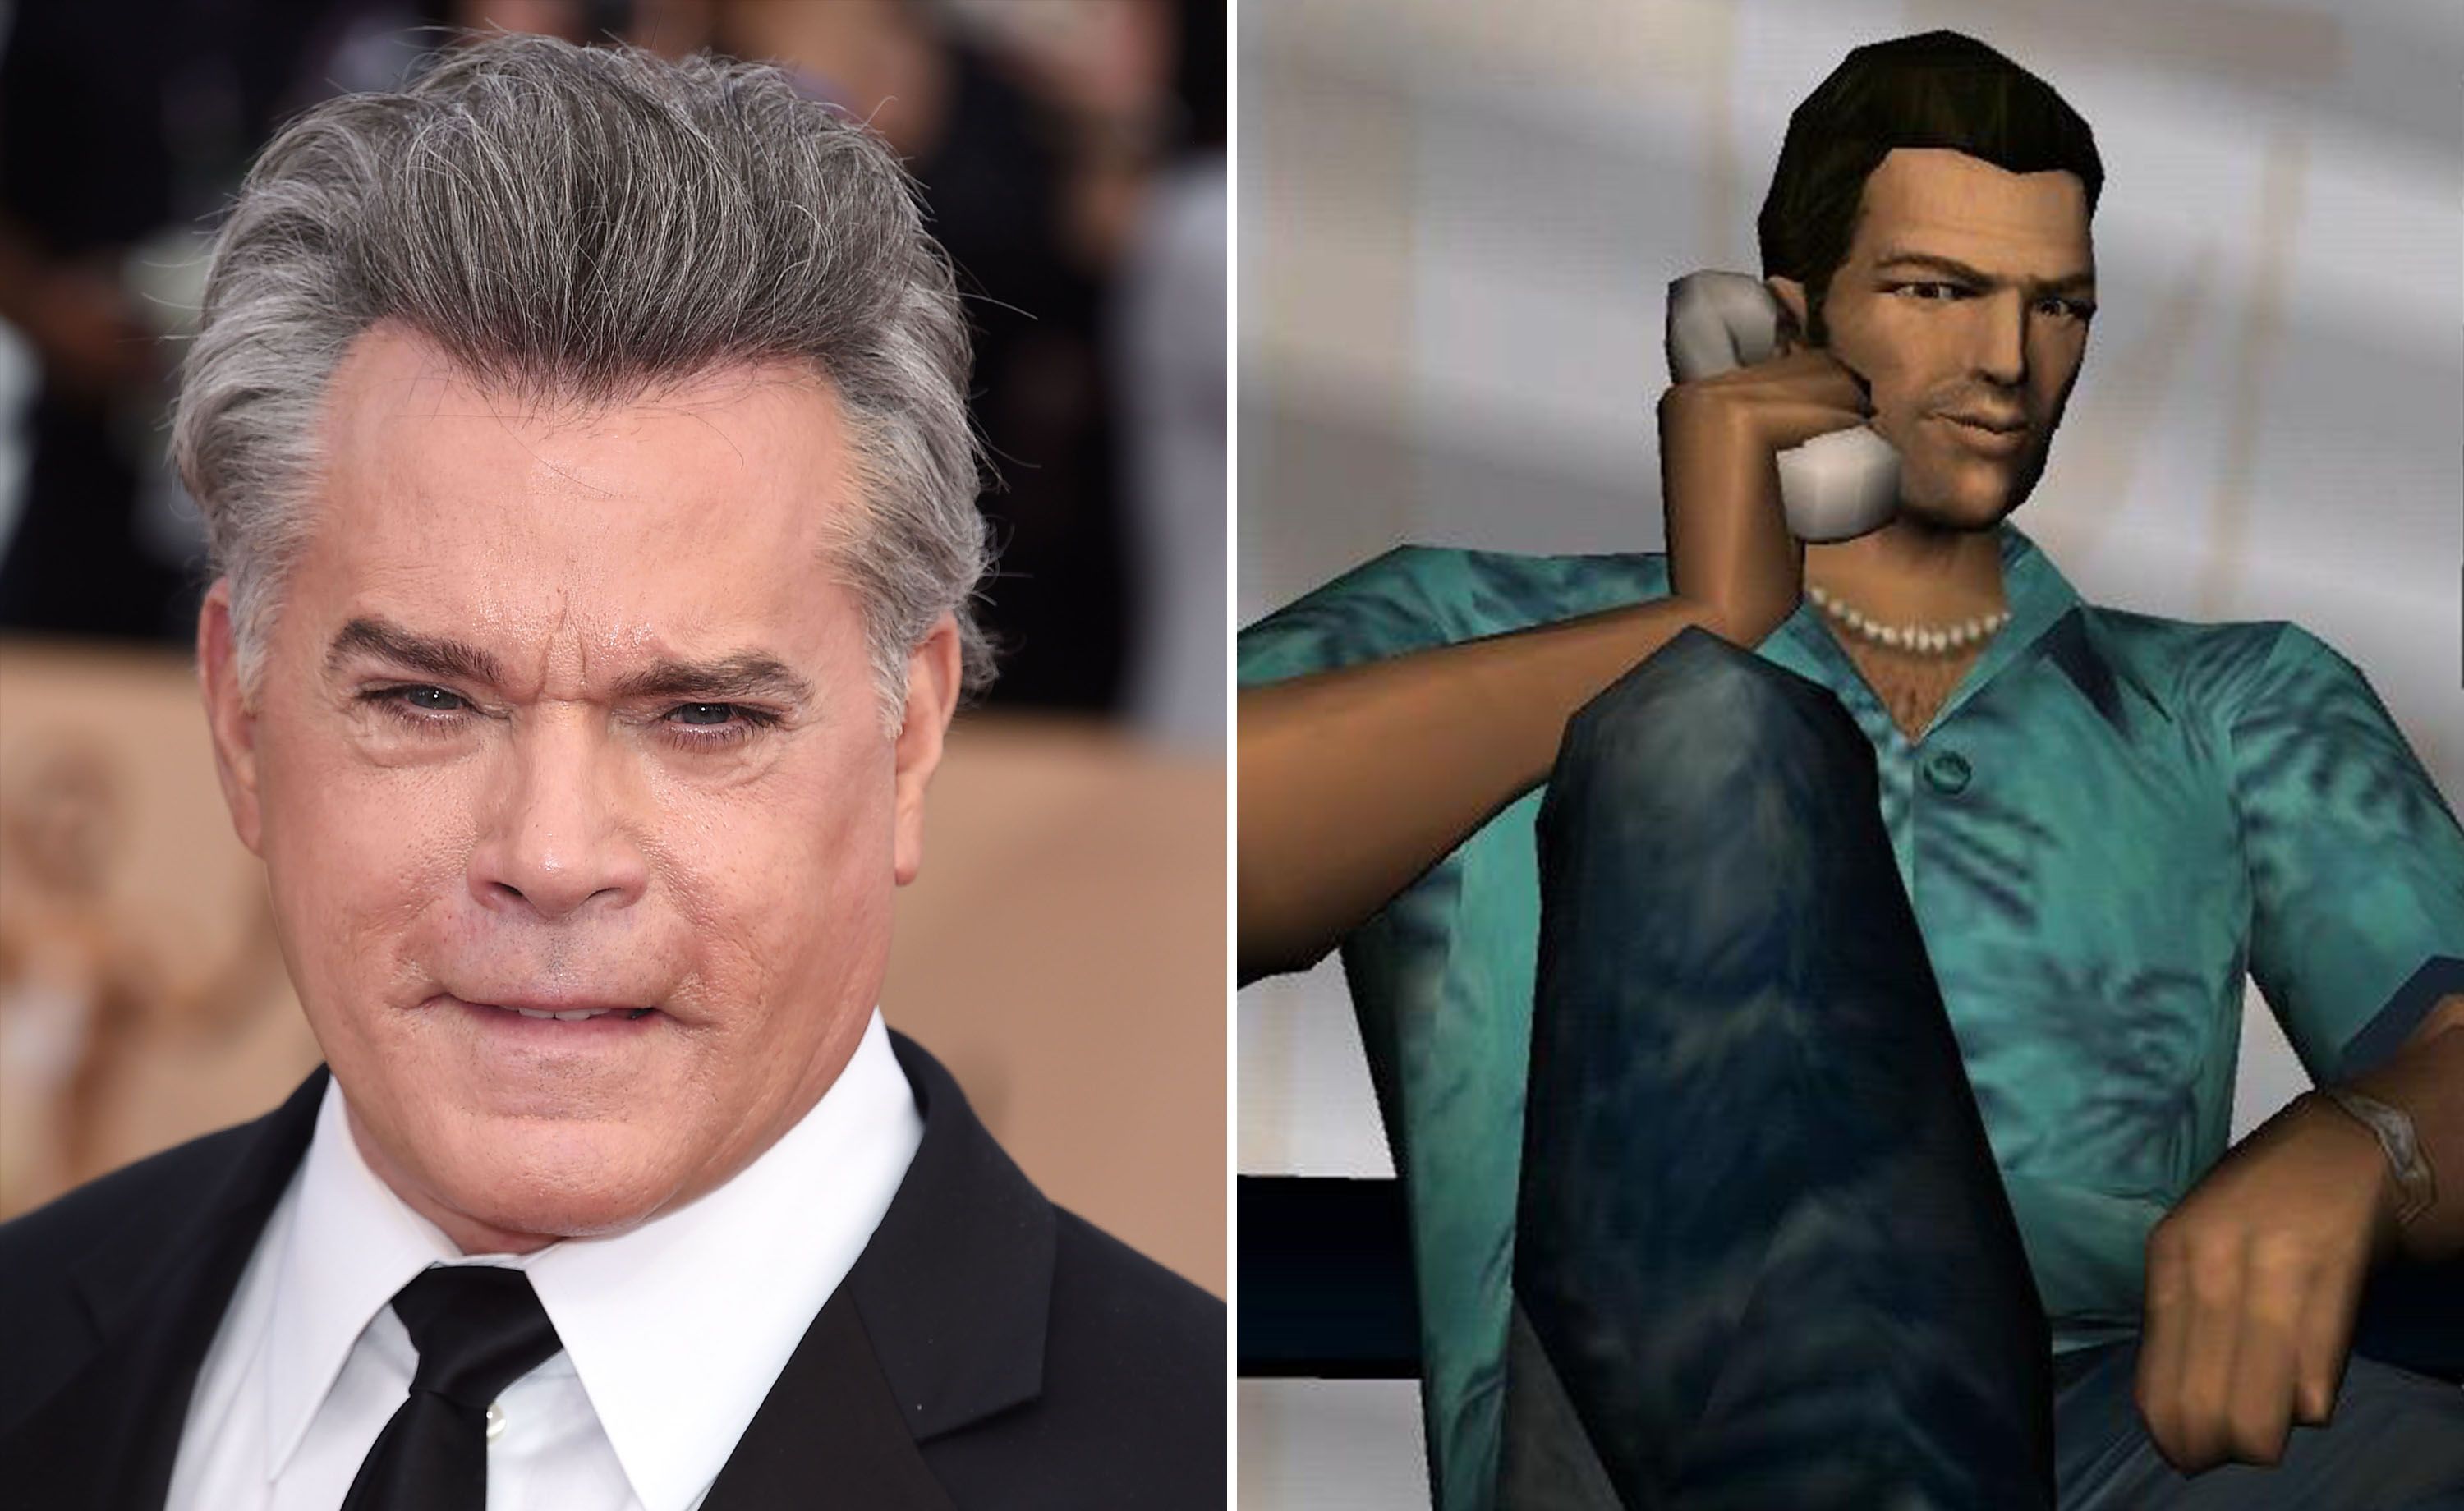 celebrities in video games - ray liotta video game character